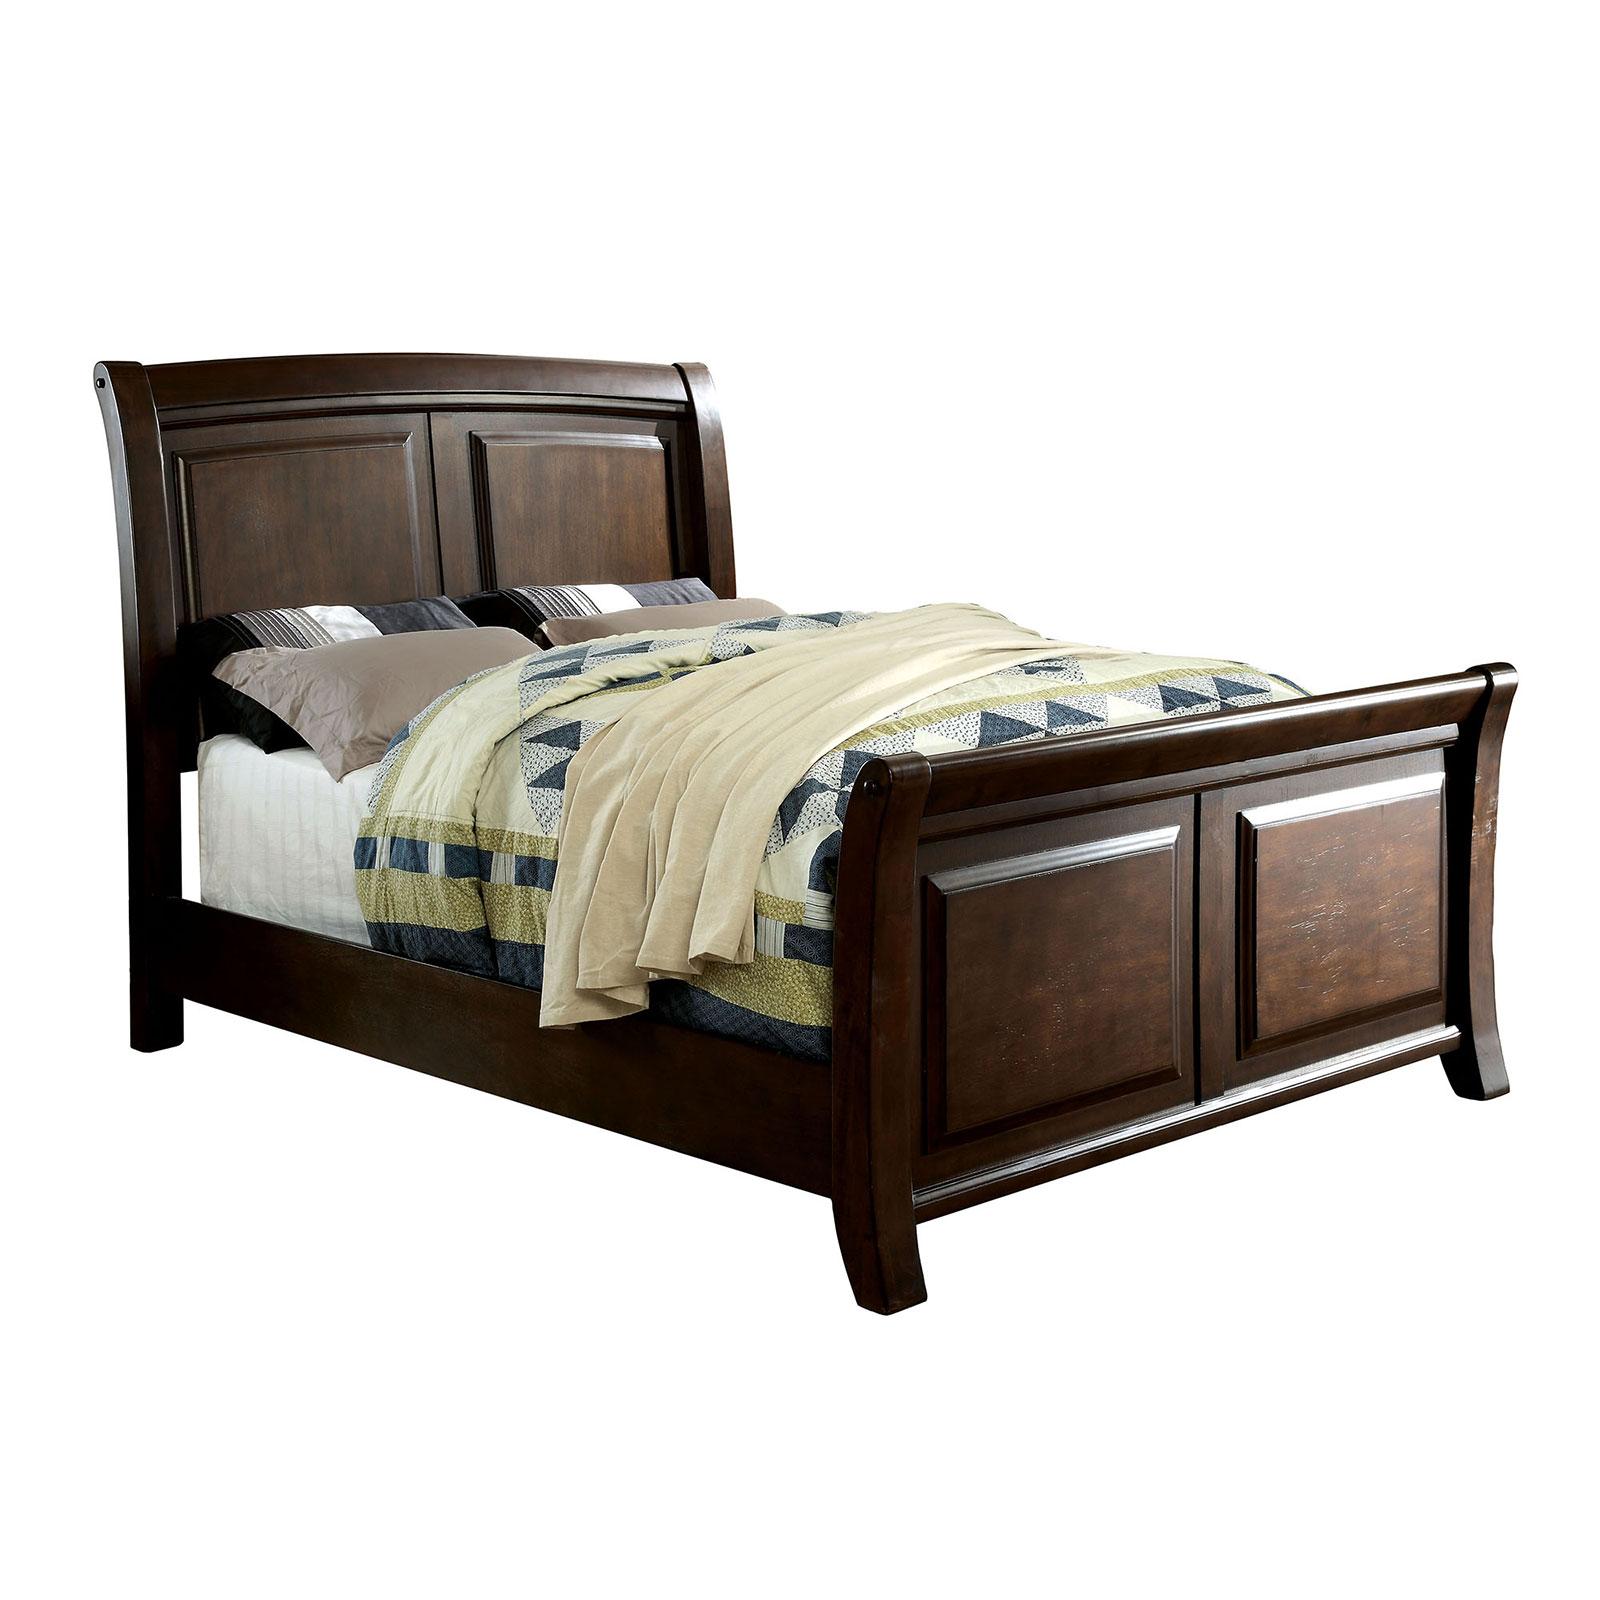 Transitional Sleigh Bed LITCHVILLE CM7383CK CM7383CK-BED in Cherry, Brown Lacquer